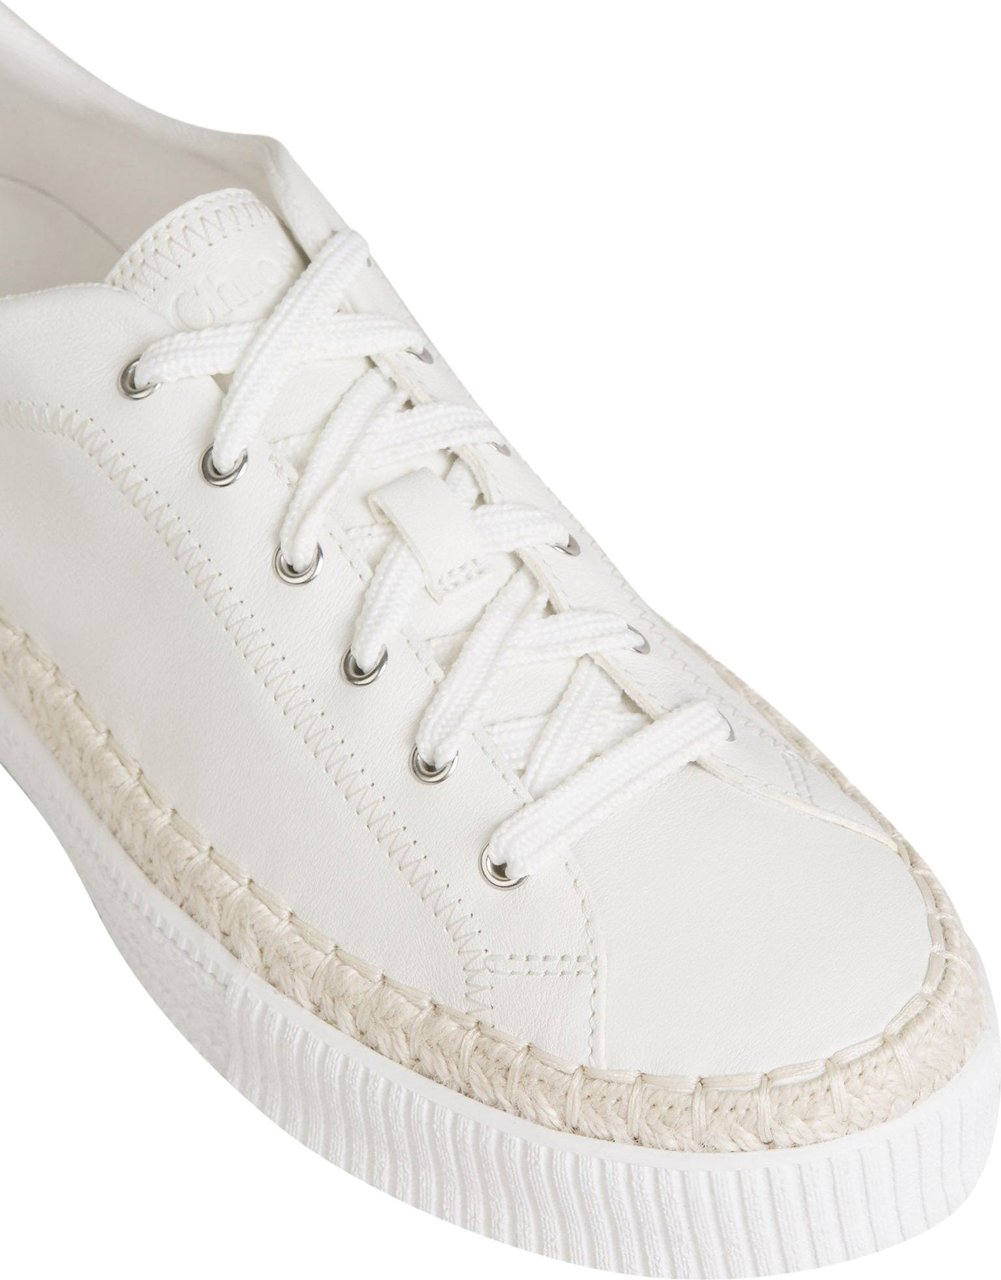 Chloé Leather Nama Sneakers Divers